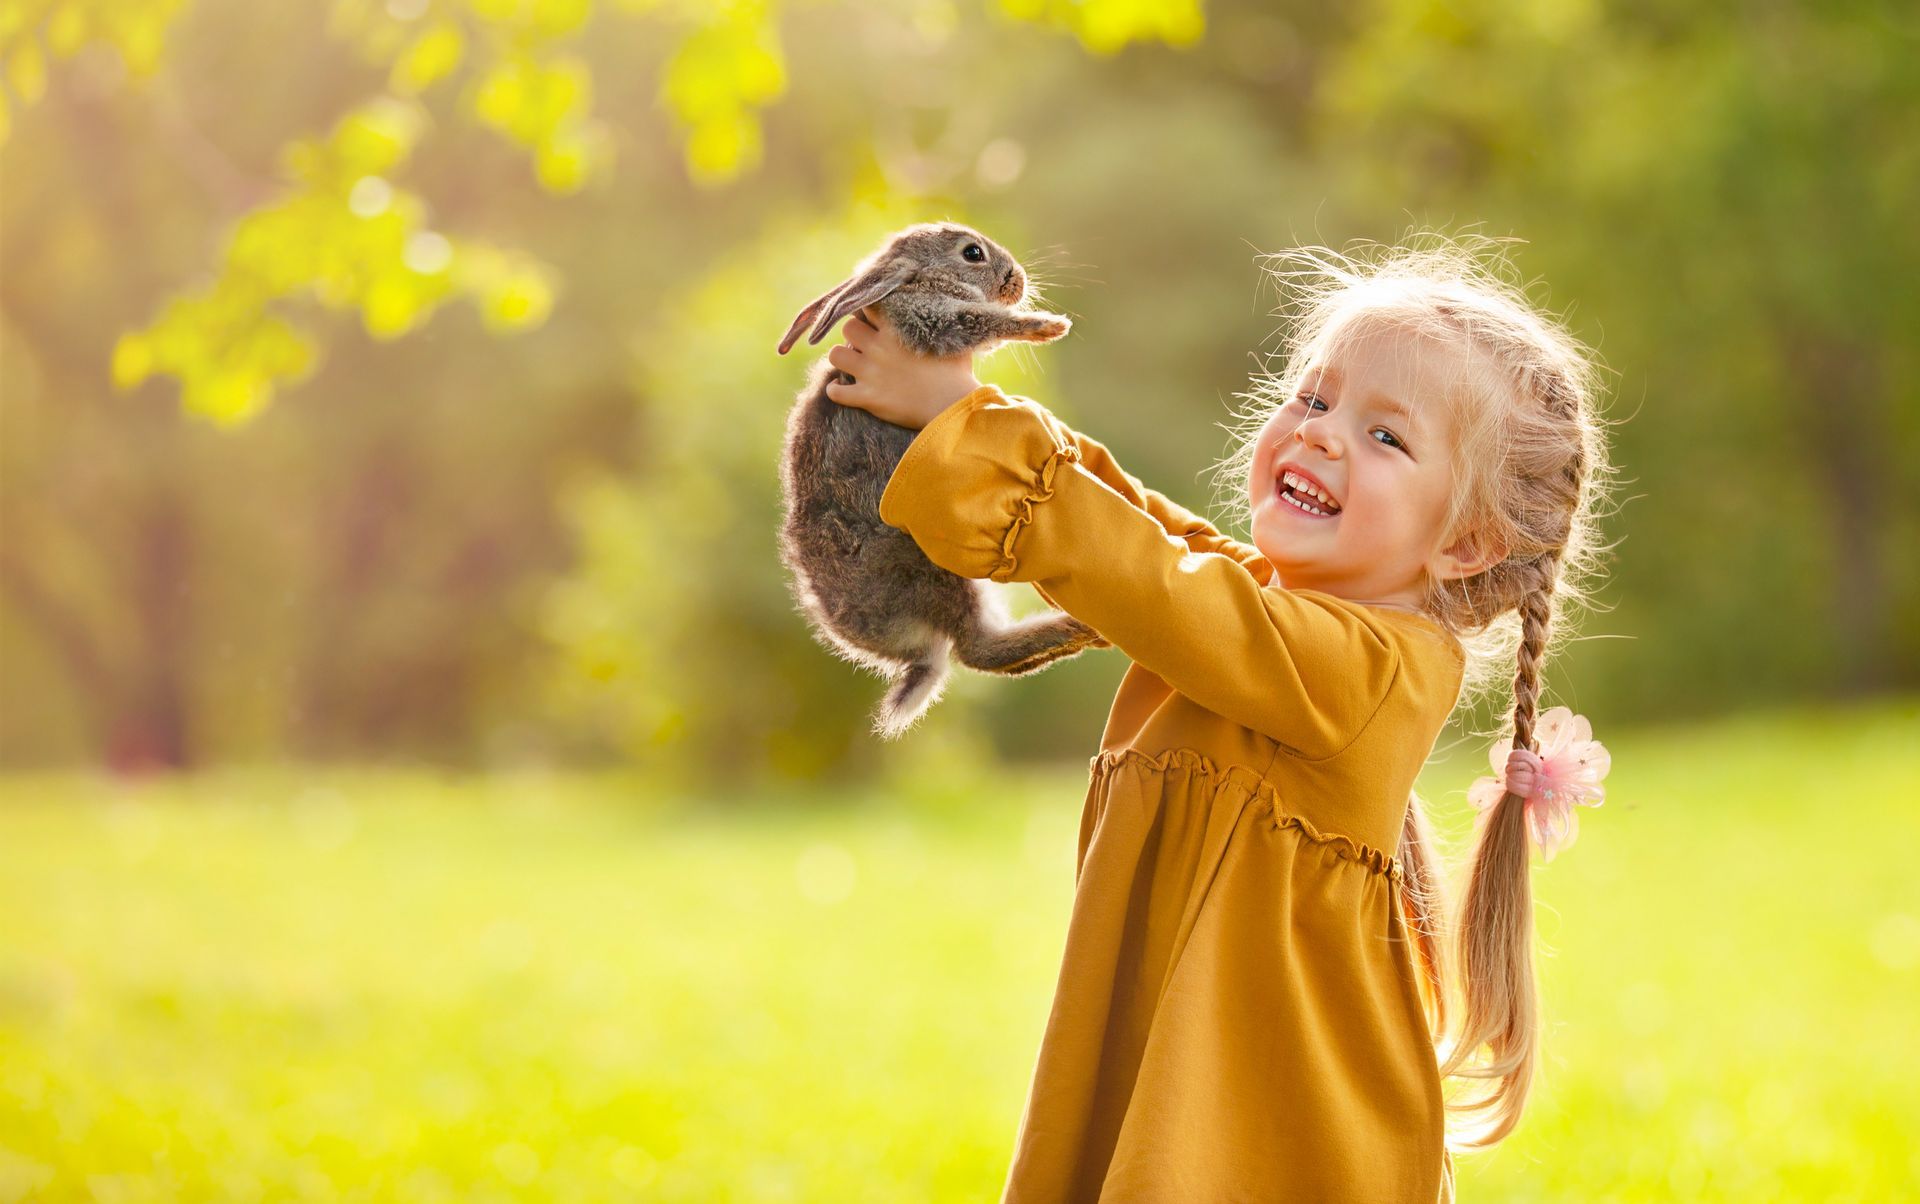 A little girl is holding a small rabbit in her hands.